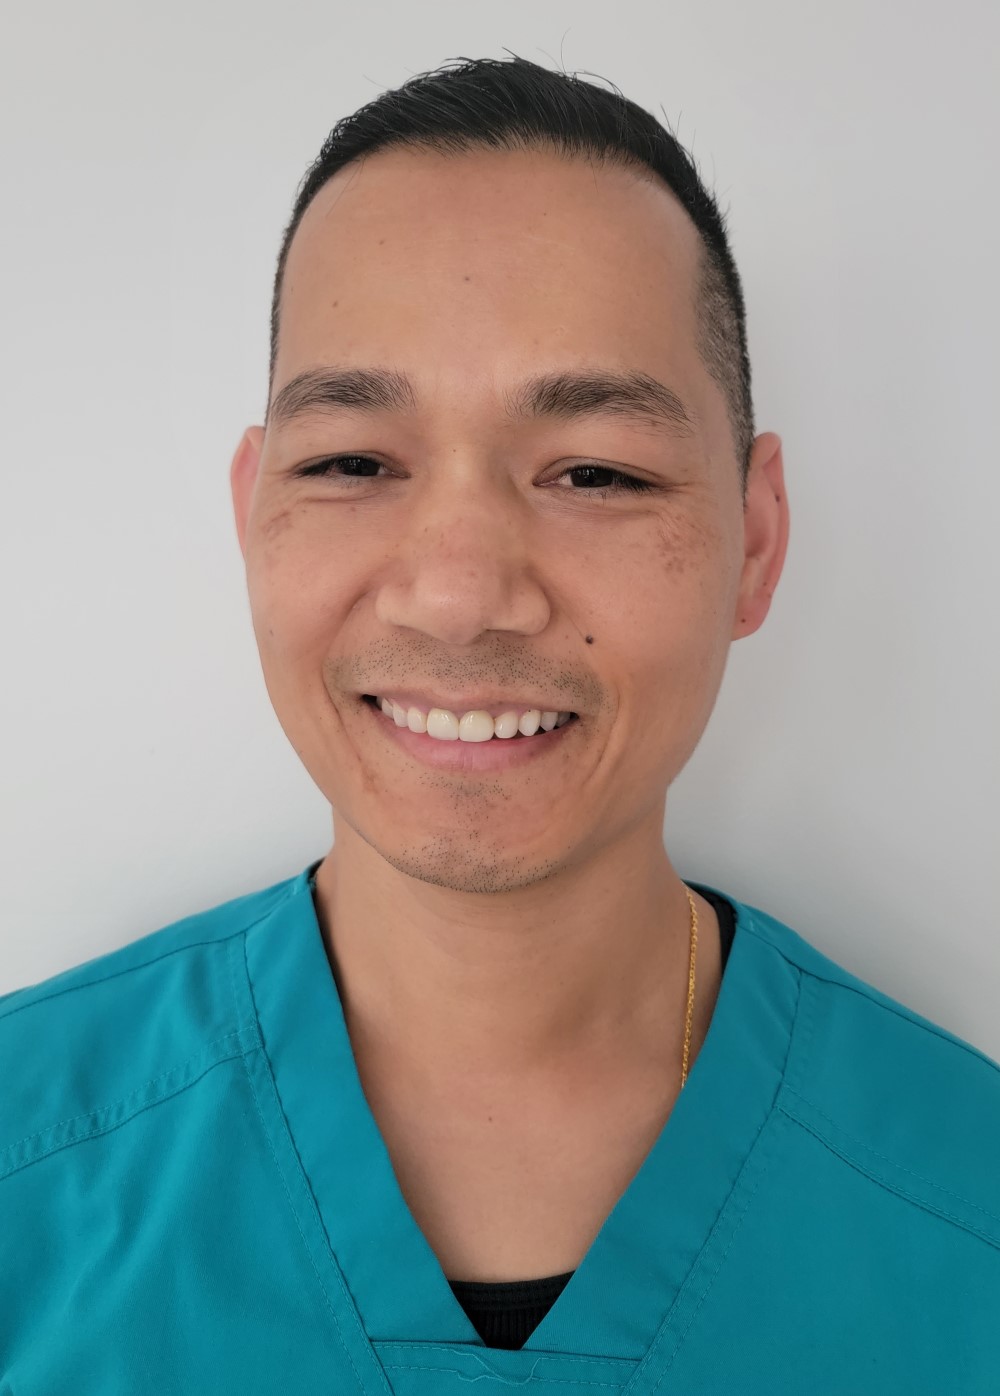 Dr. Tom Tang, DMD, a dentist with Dr. Kwon Pediatric Dentistry